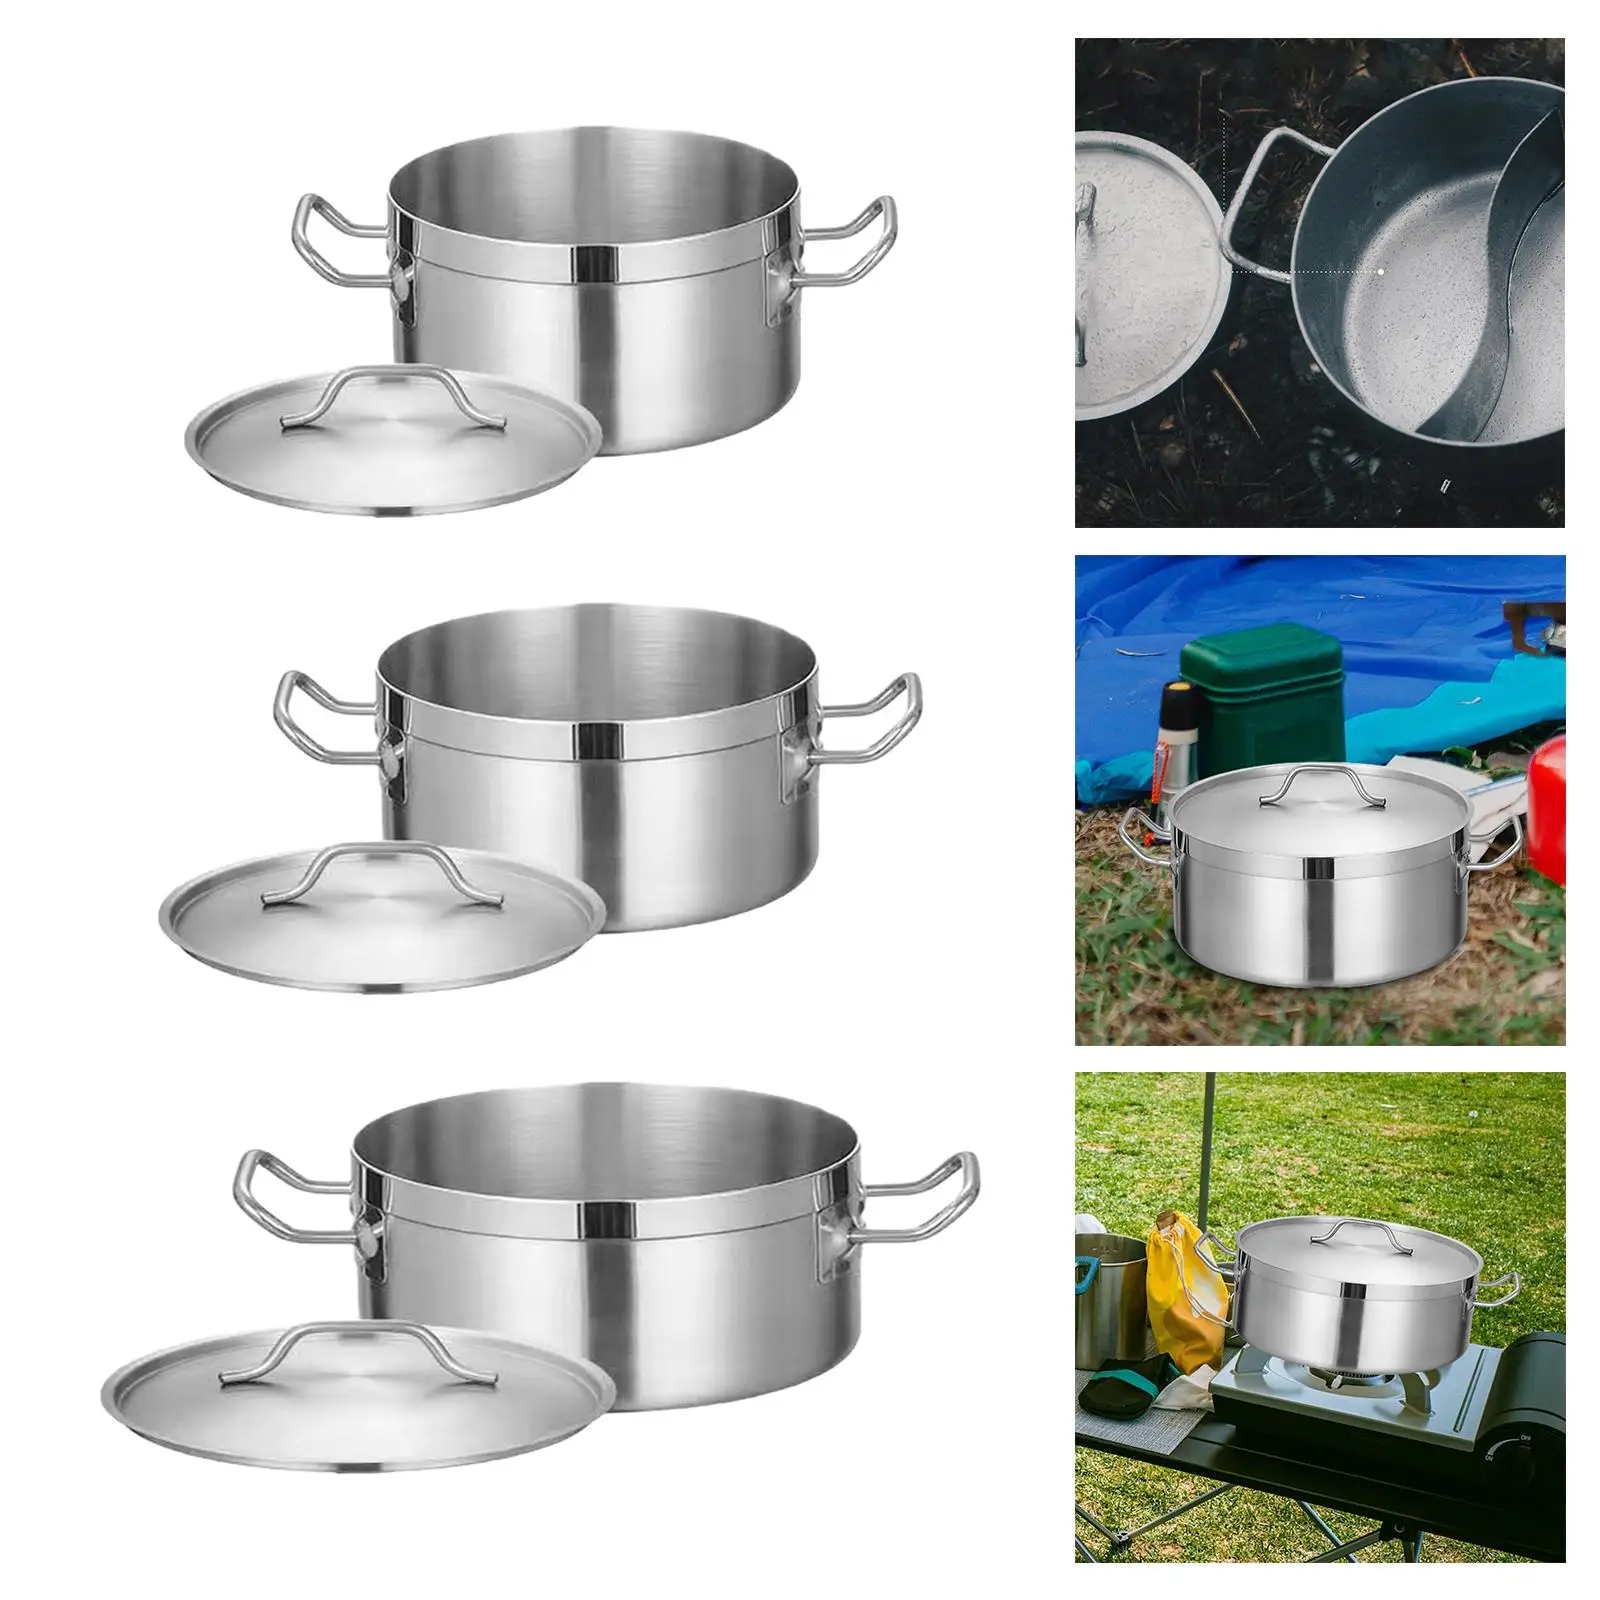 Stainless Steel Stockpot Saucepan Multipurpose Double Handles Small Soup Pot for Kitchen Outdoor Camping Household Commercial